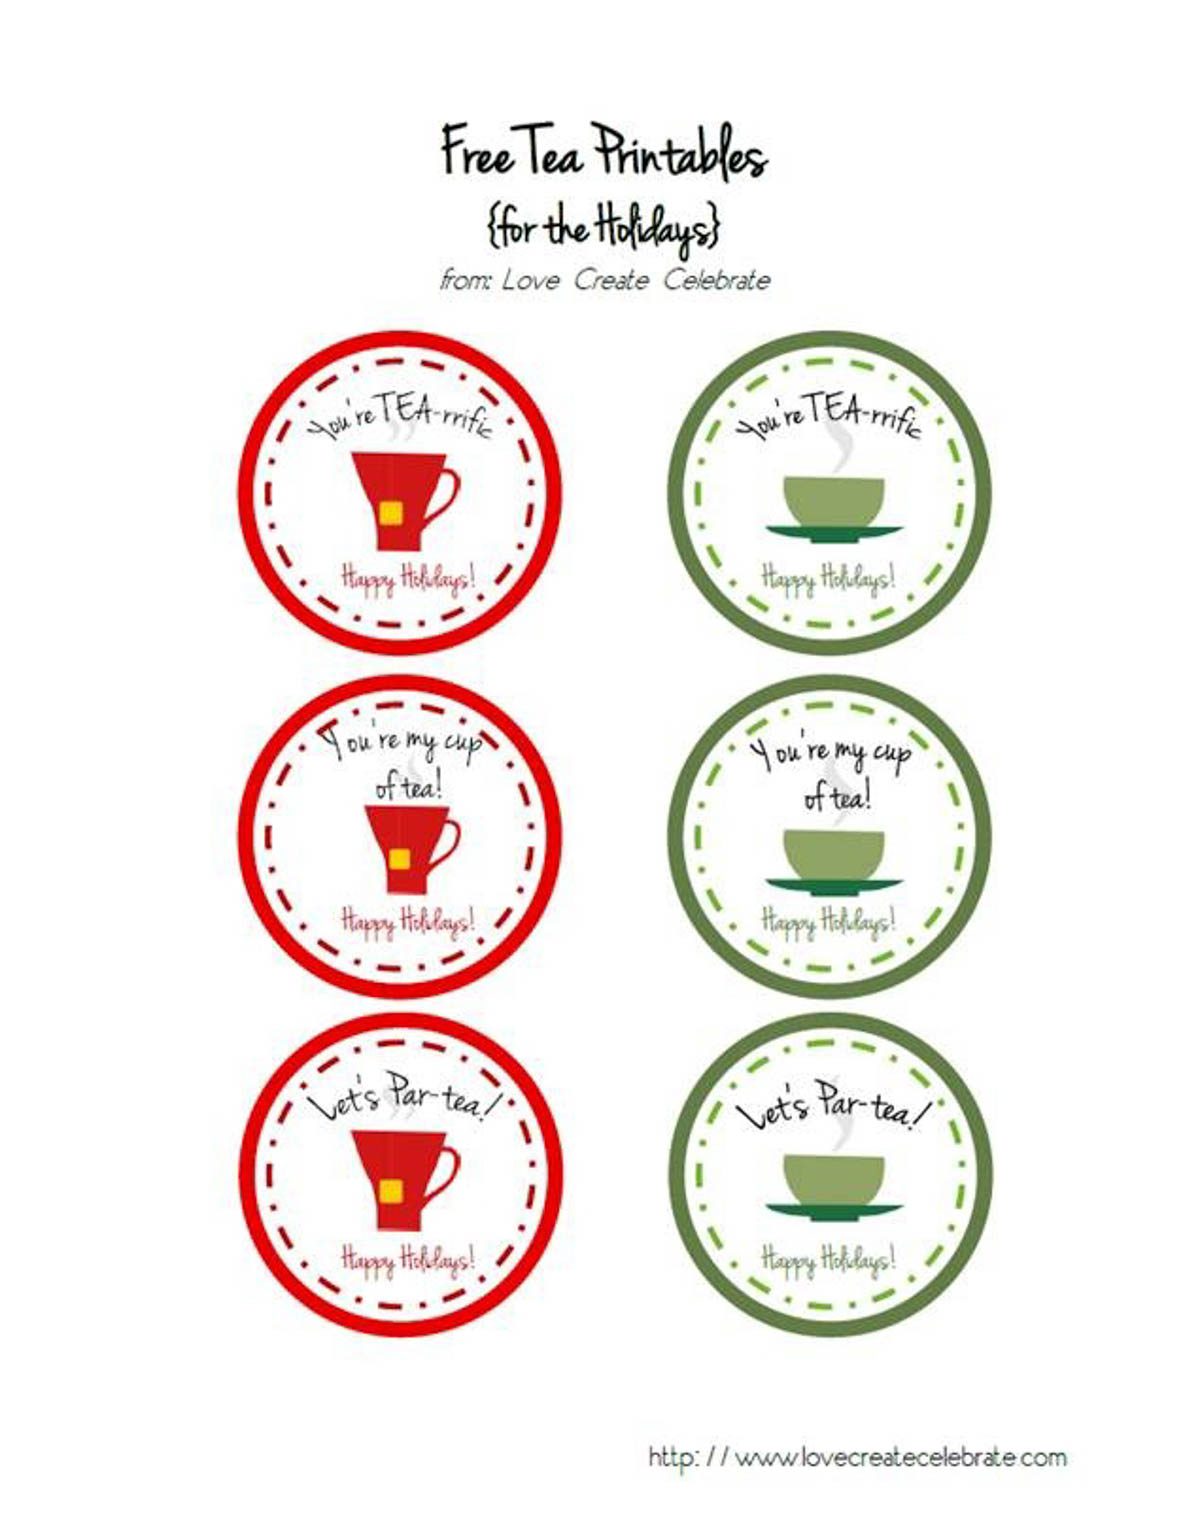 Printable labels for individual container of fresh peppermint tea.